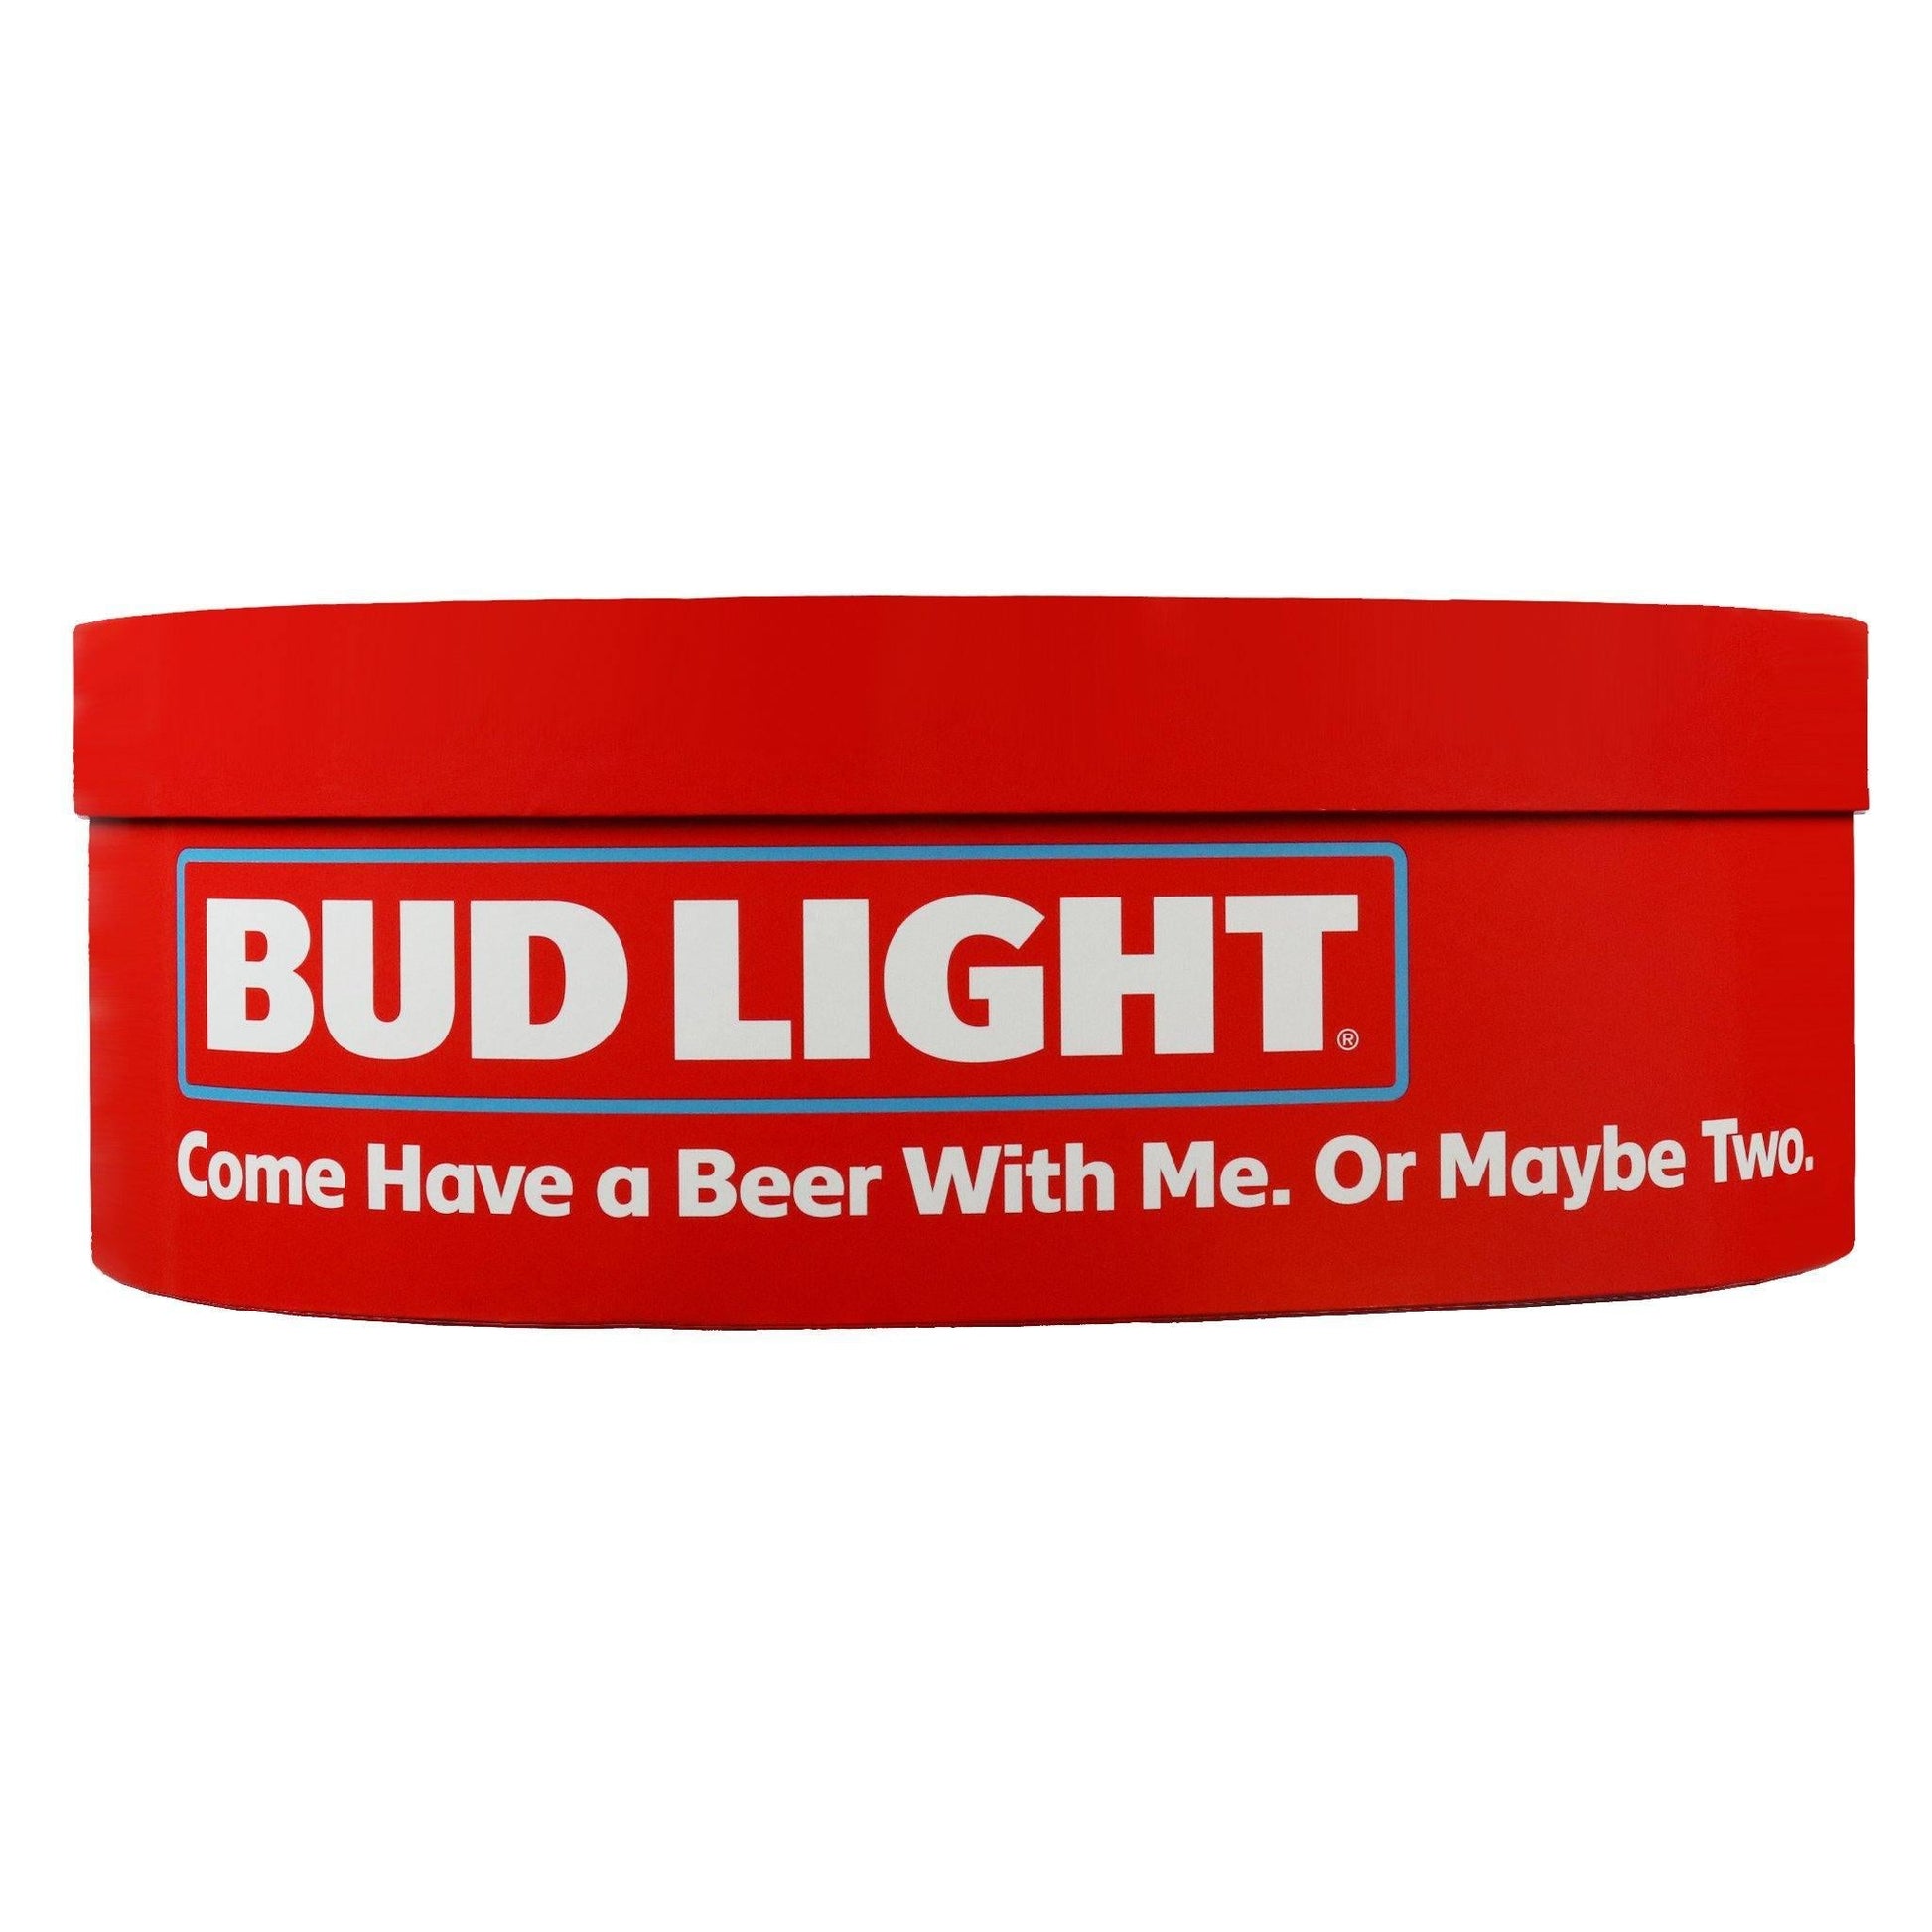 red bud light valentines day box that states "roses are red, bud light is blue"